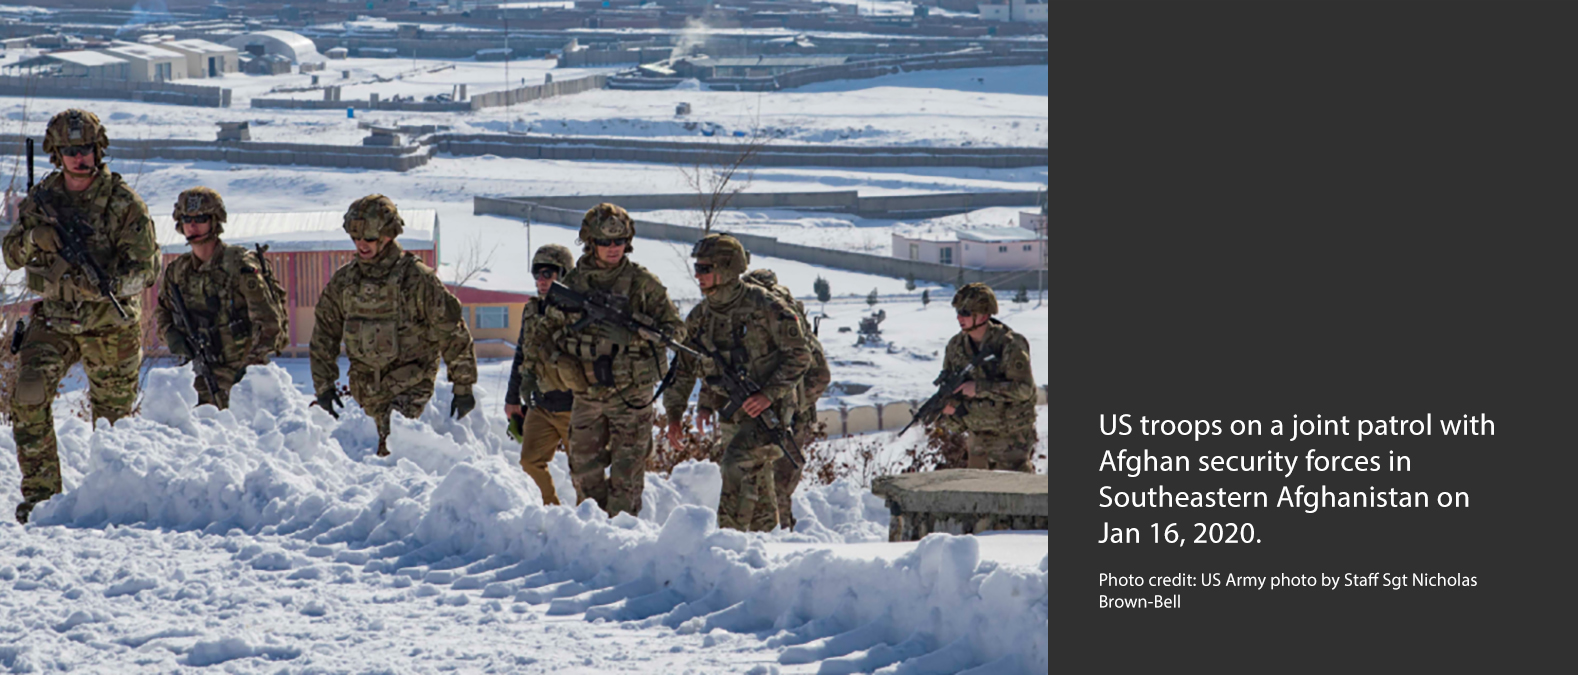 US troops on a joint patrol with Afghan security forces 